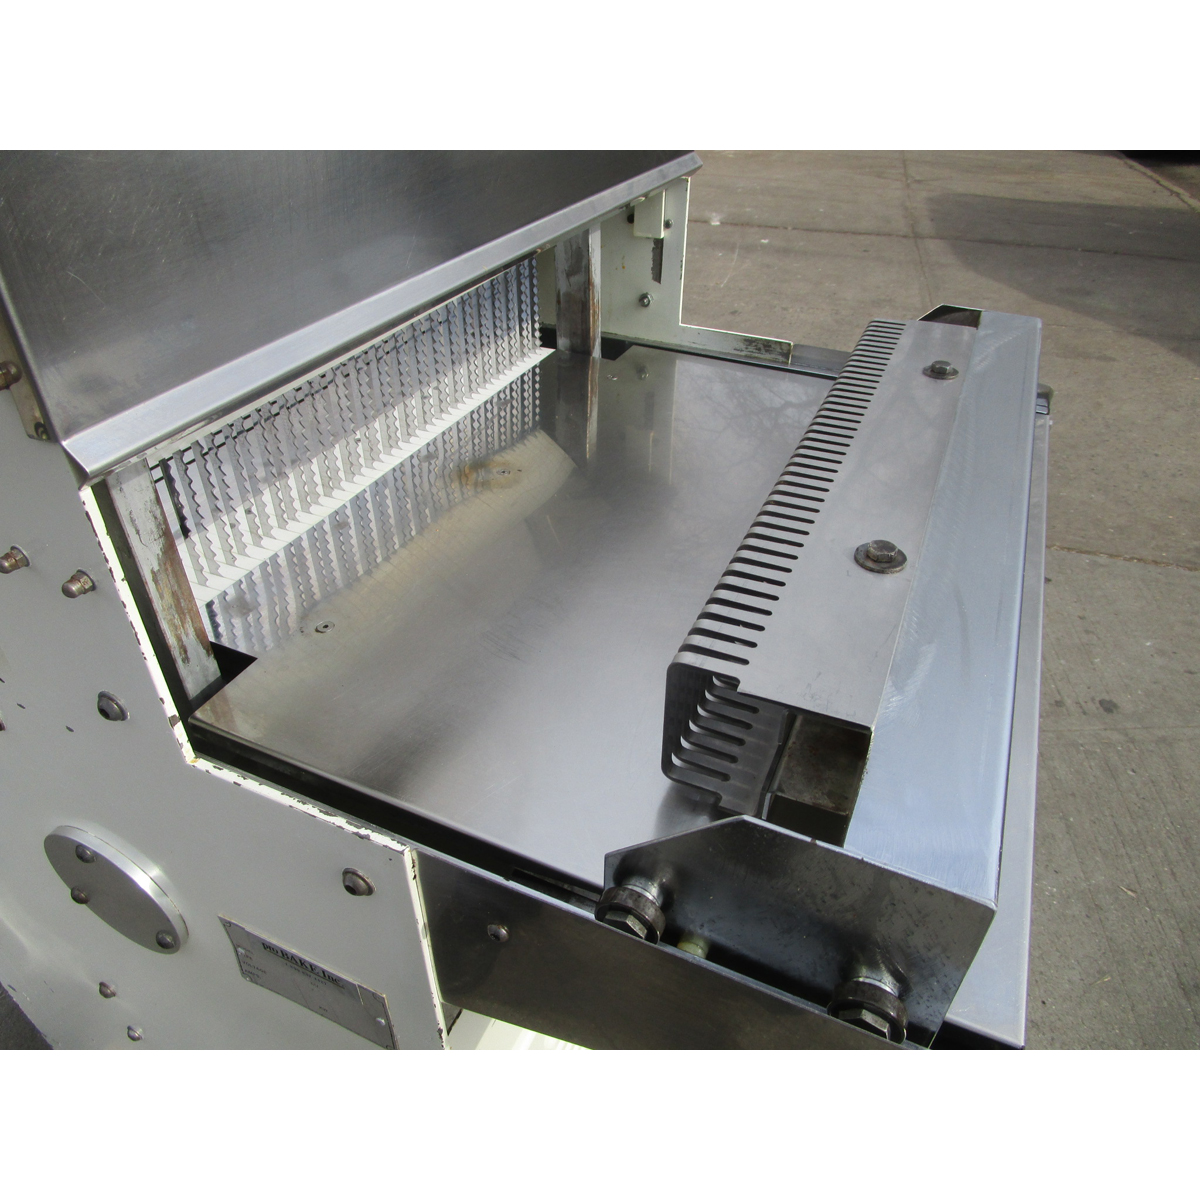 Brevetti Gasparin 150 Semiautomatic Bread Slicer 10.5mm Slices, Used Very Good Condition image 5